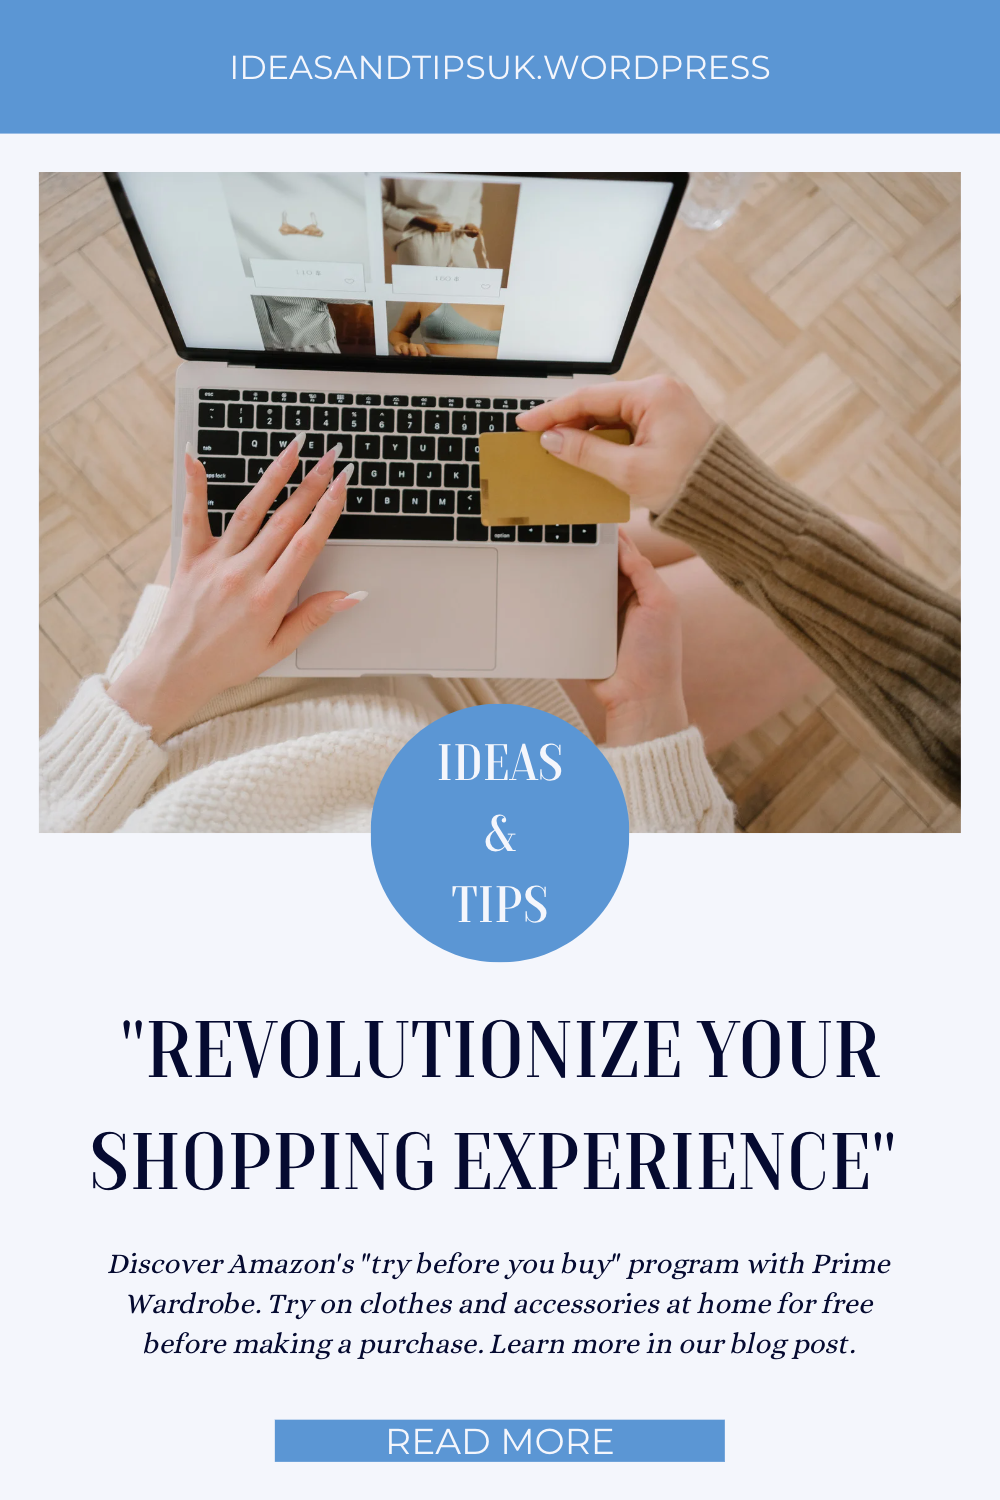 “Revolutionize Your Shopping Experience: Amazon’s ‘Try Before You Buy’ Program”